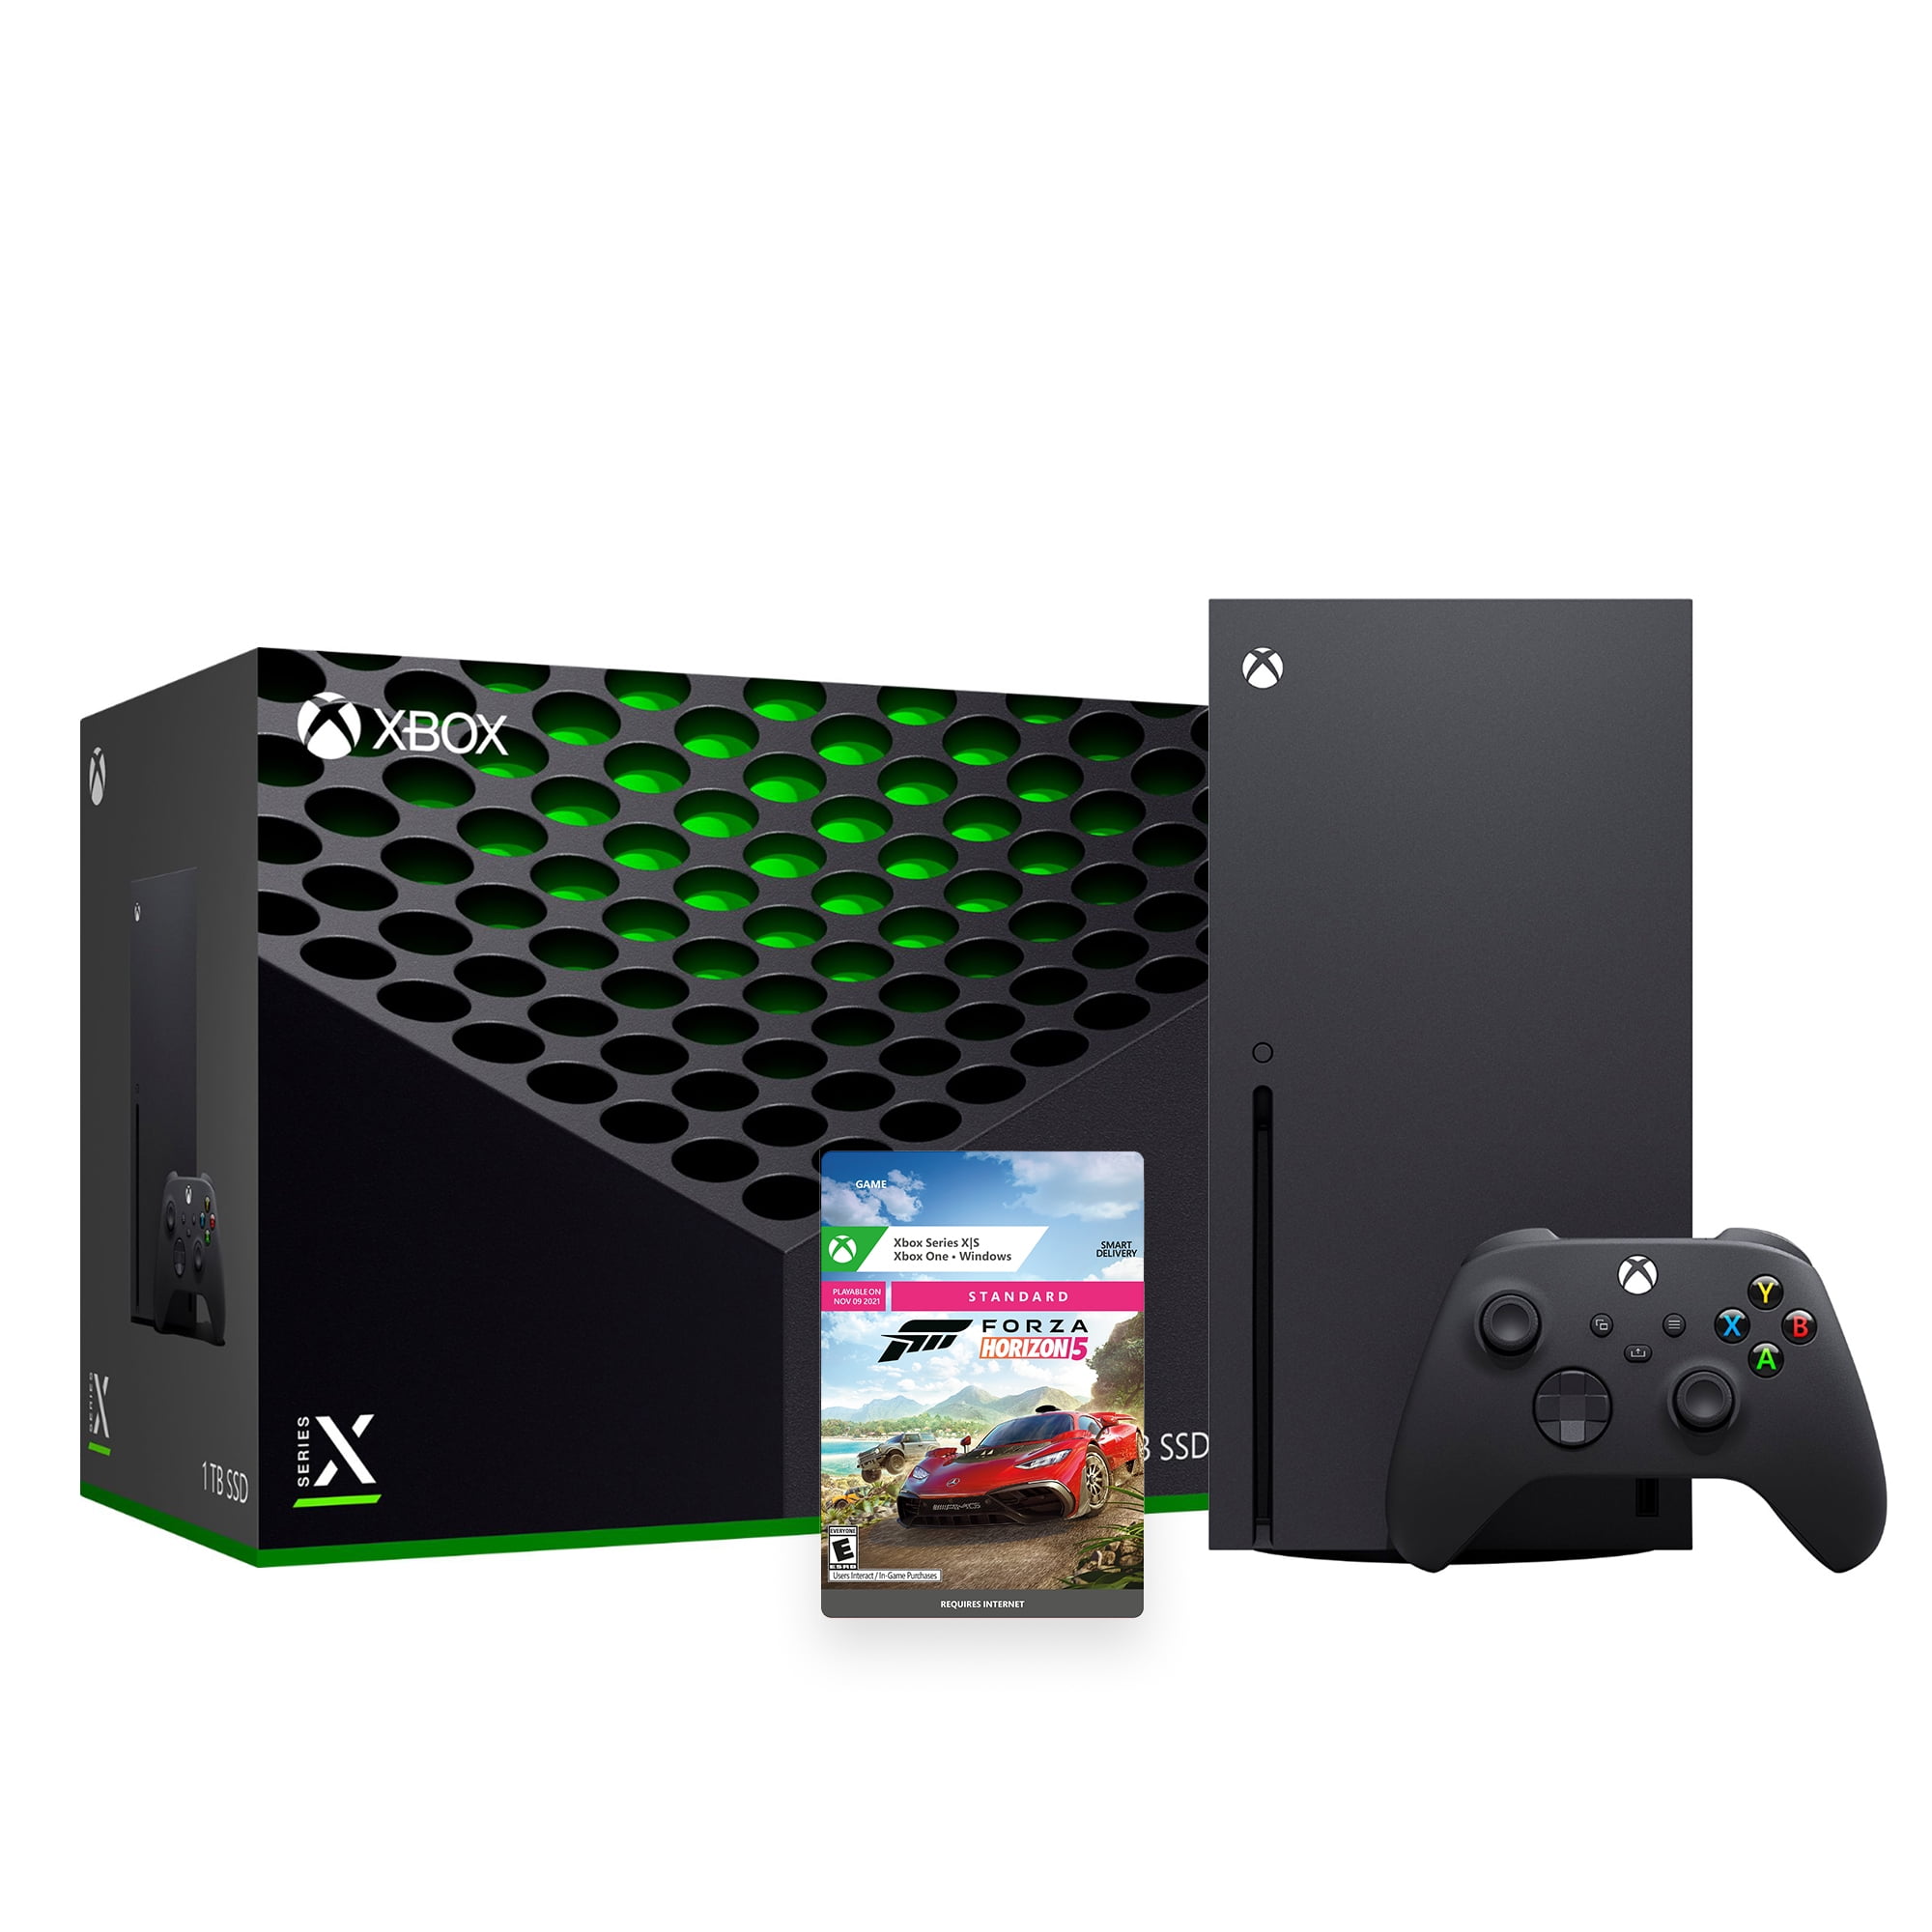 Microsoft Latest Xbox X Gaming Console Bundle - 1TB SSD Black Xbox Console and Wireless Controller with Forza Horizon 5 and Mytrix HDMI Cable Walmart.com